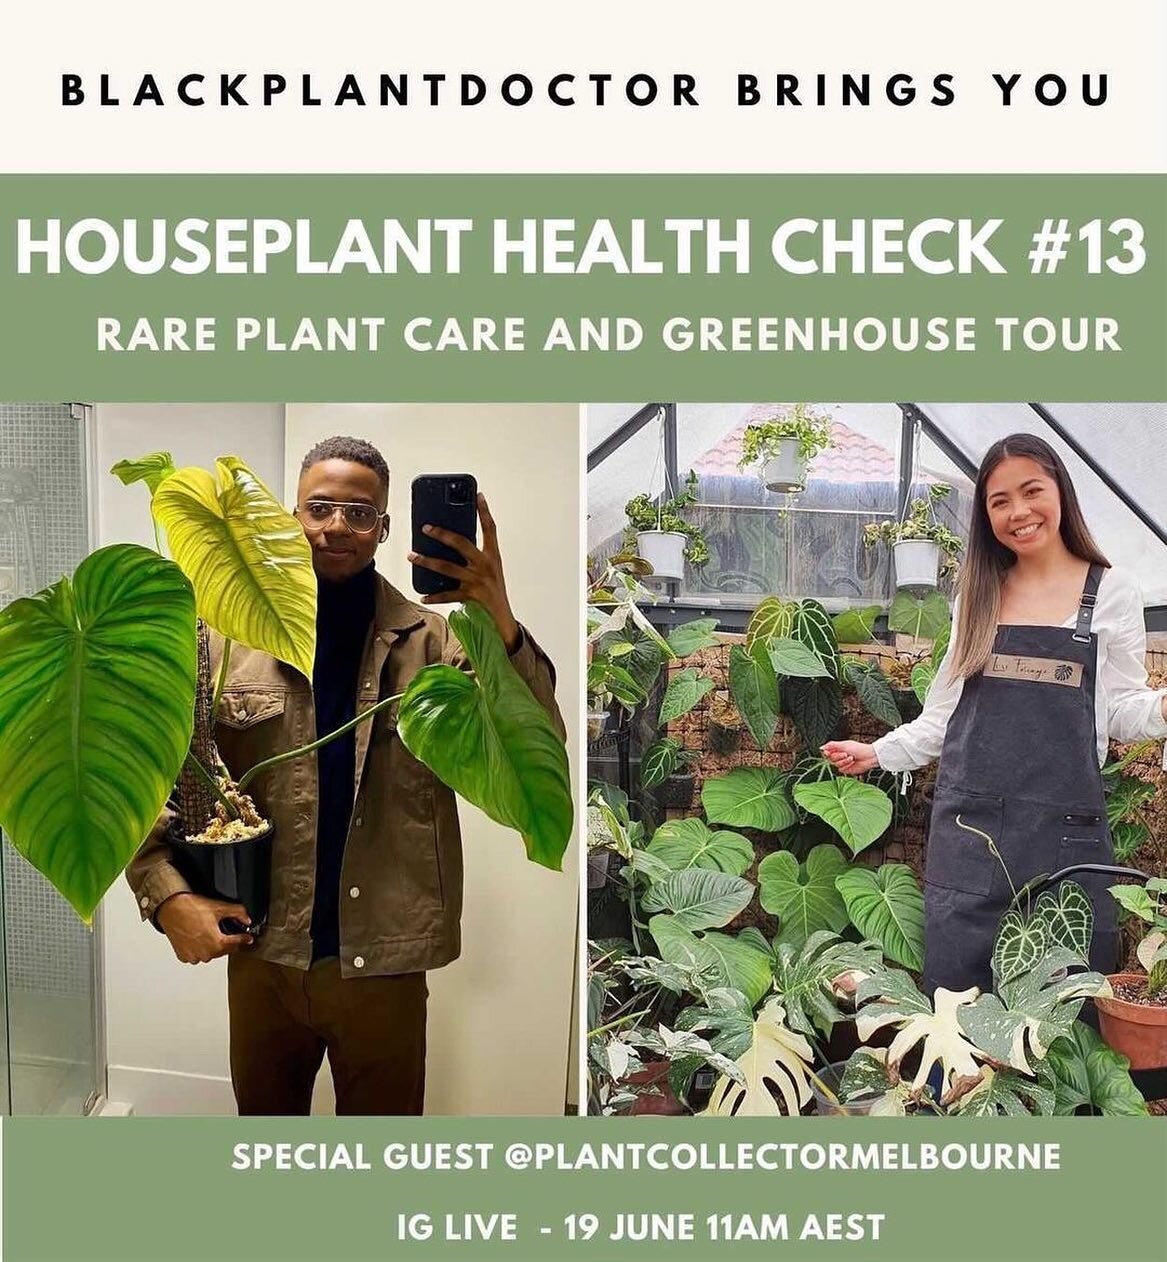 Coming to you this Saturday my beautiful plant people! ✨

It&rsquo;s been a while since I did an IG Live 😉 Brings me back to the good ol days when I use to do weekly one

Come hang out with us Saturday morning with a tea, coffee, fur baby and/or fav